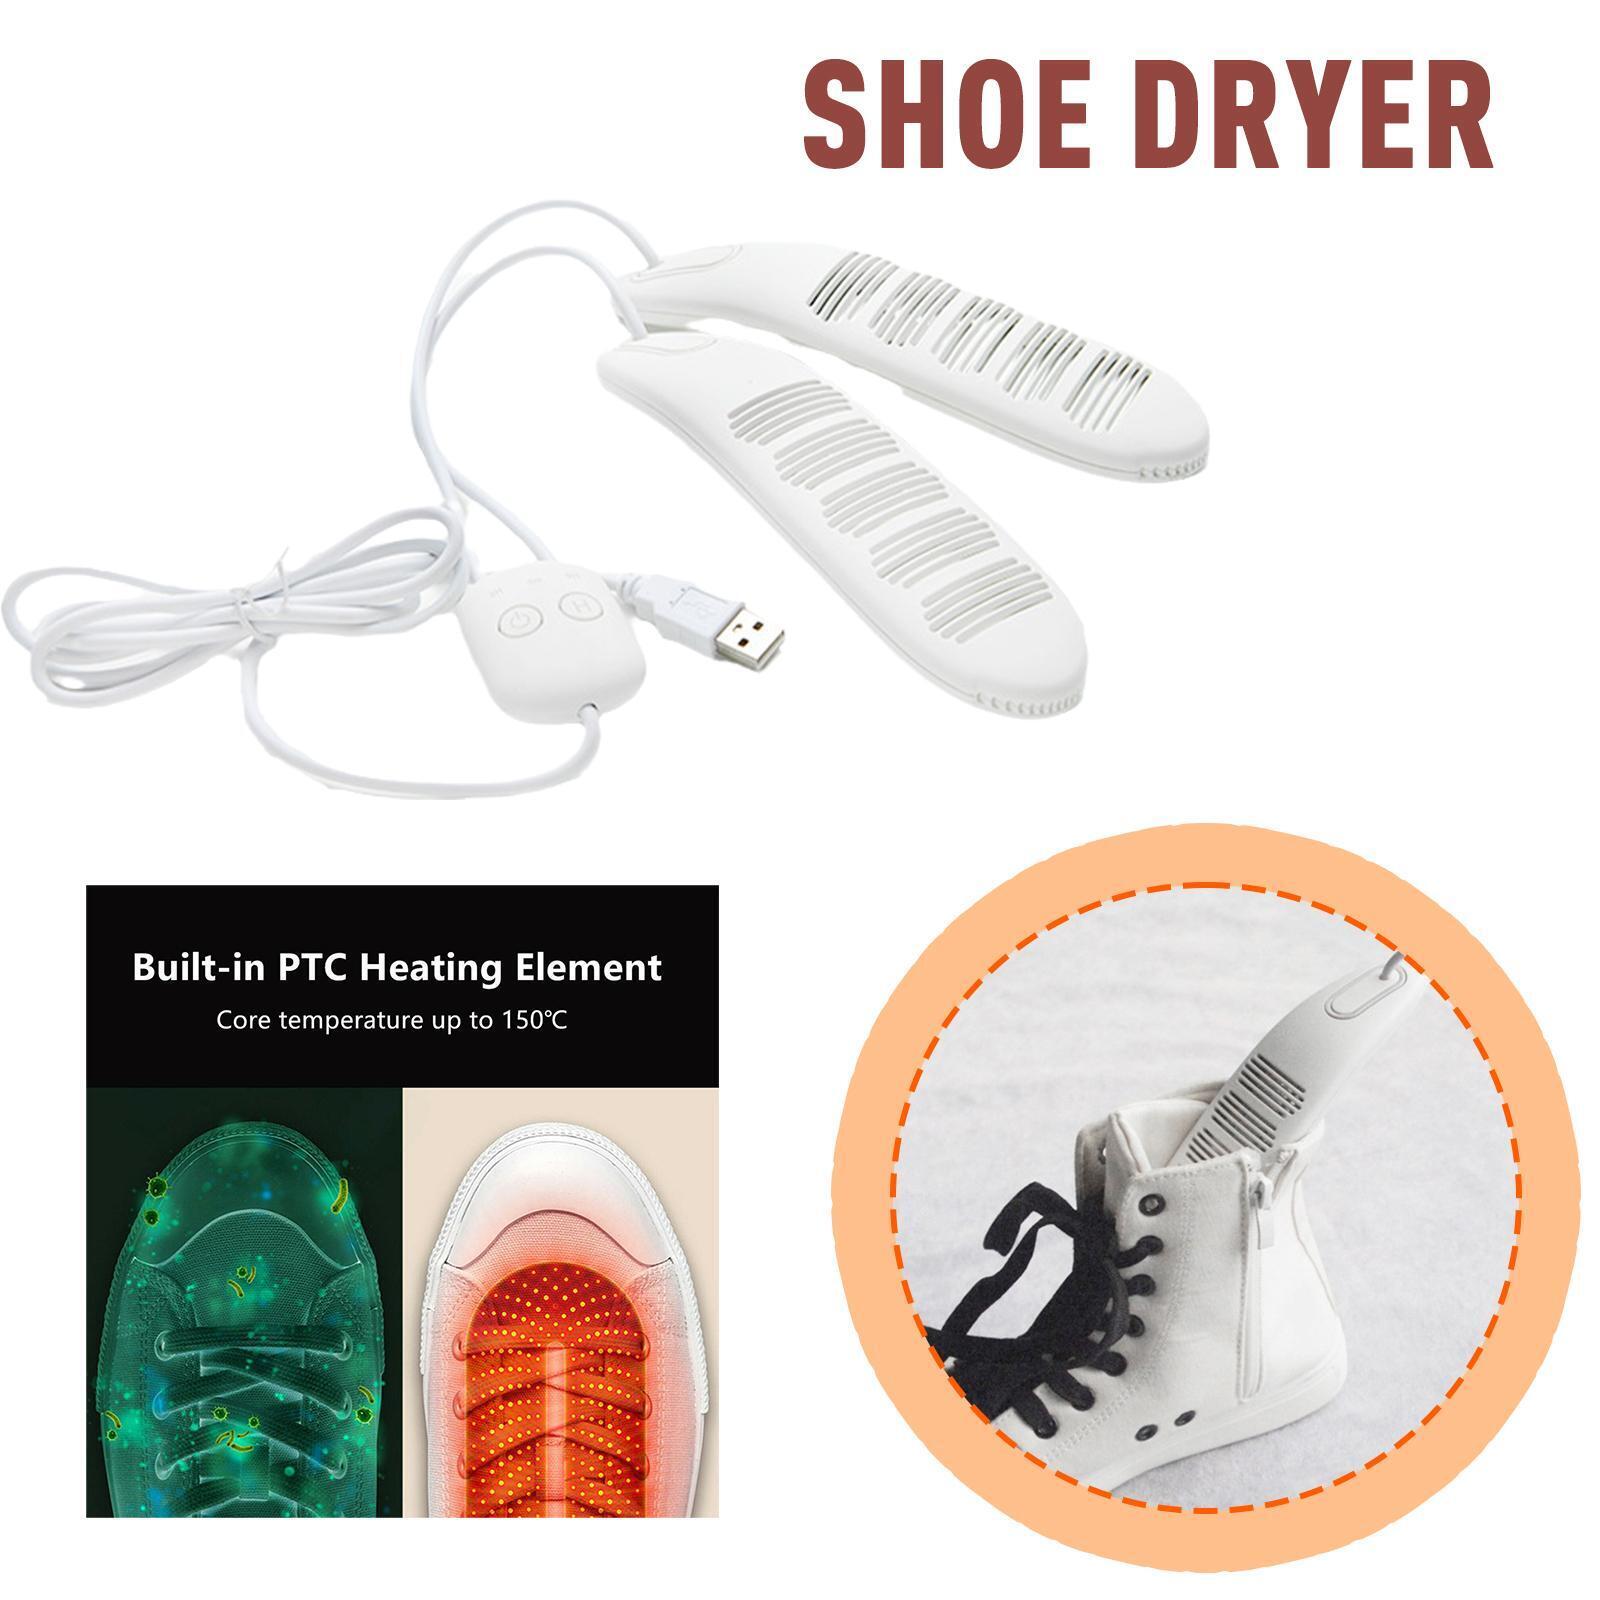 Usb Portable Shoe Dryer, Drying, Dehumidification& For Boots Deodorize I4n1